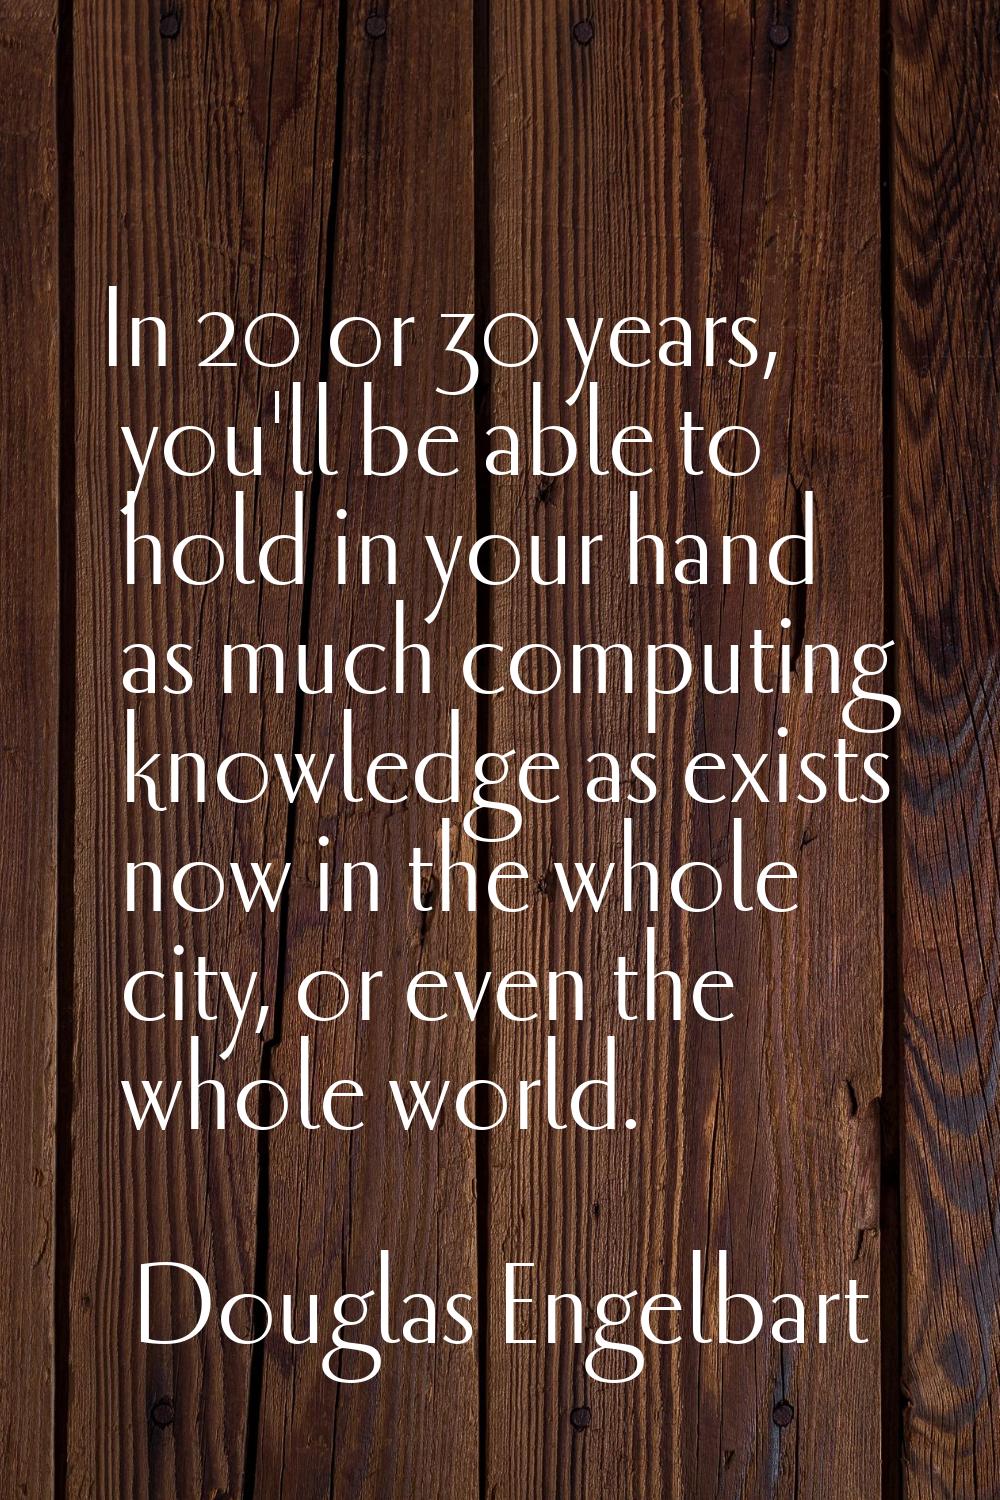 In 20 or 30 years, you'll be able to hold in your hand as much computing knowledge as exists now in